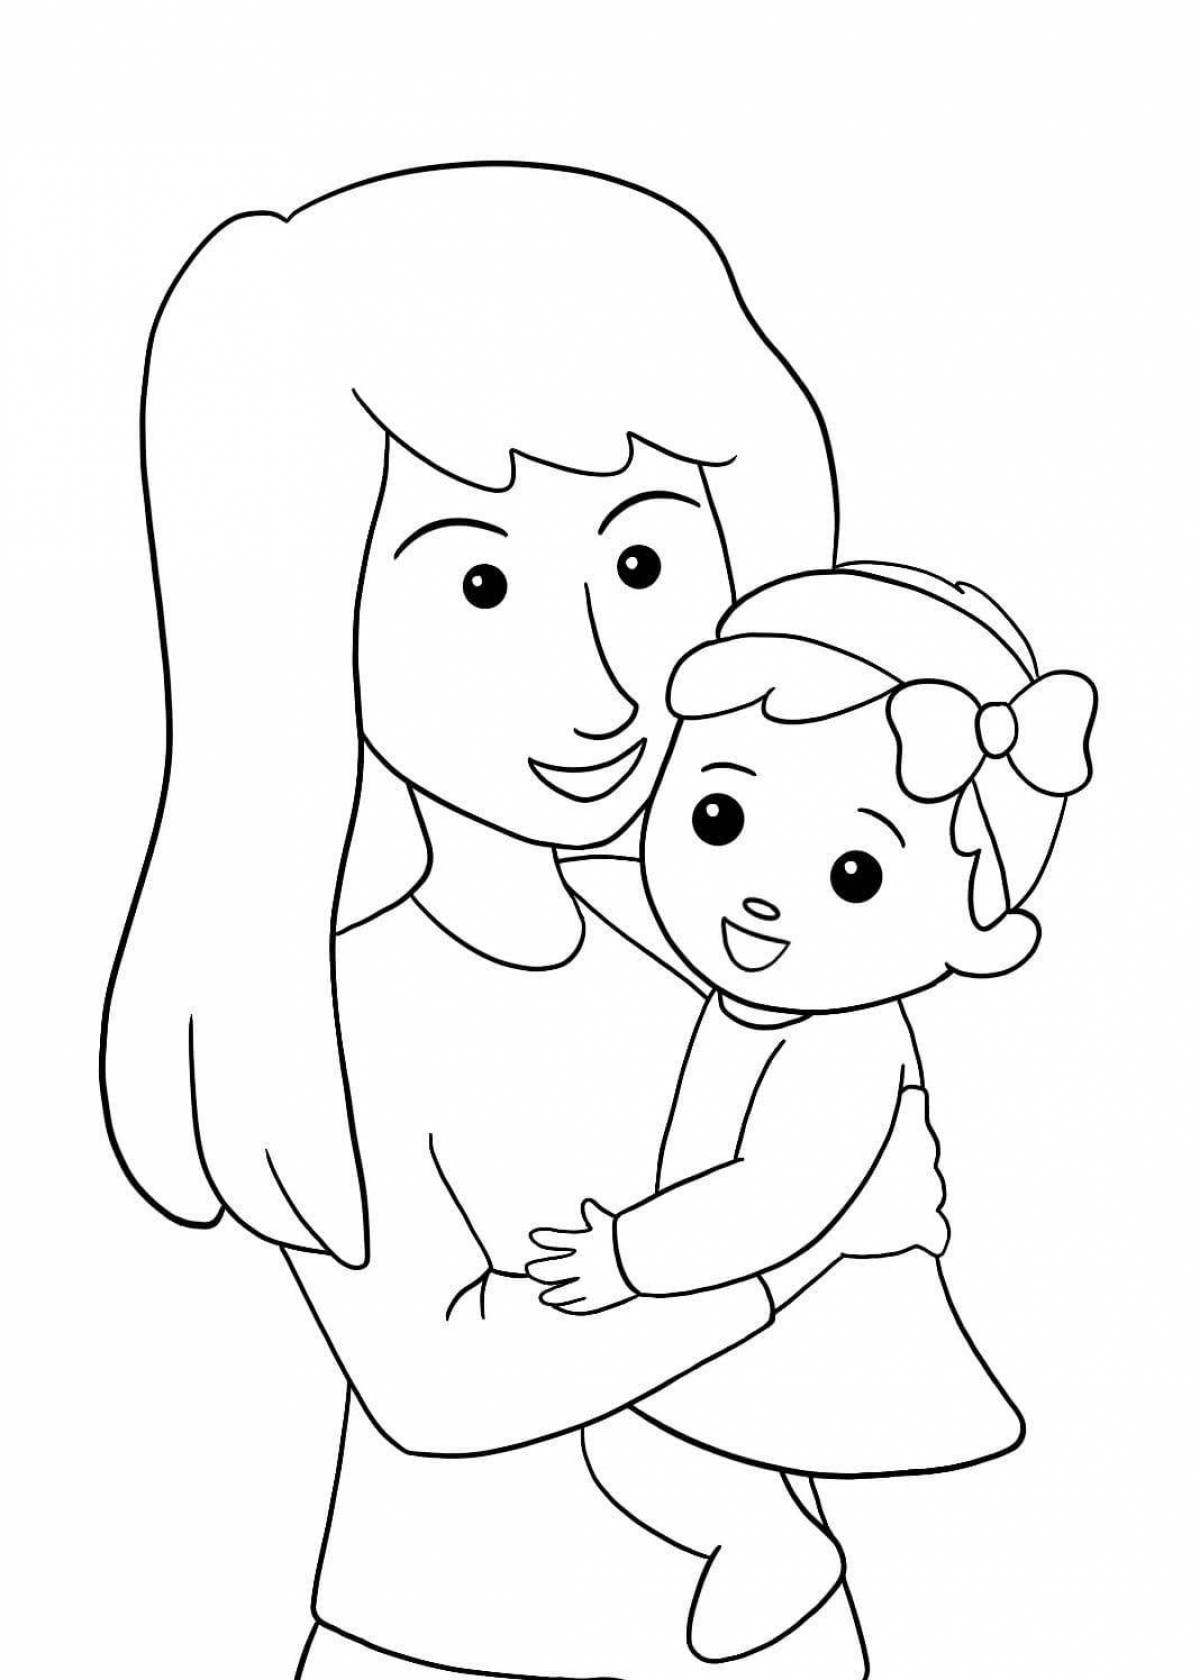 Glowing daughter coloring page